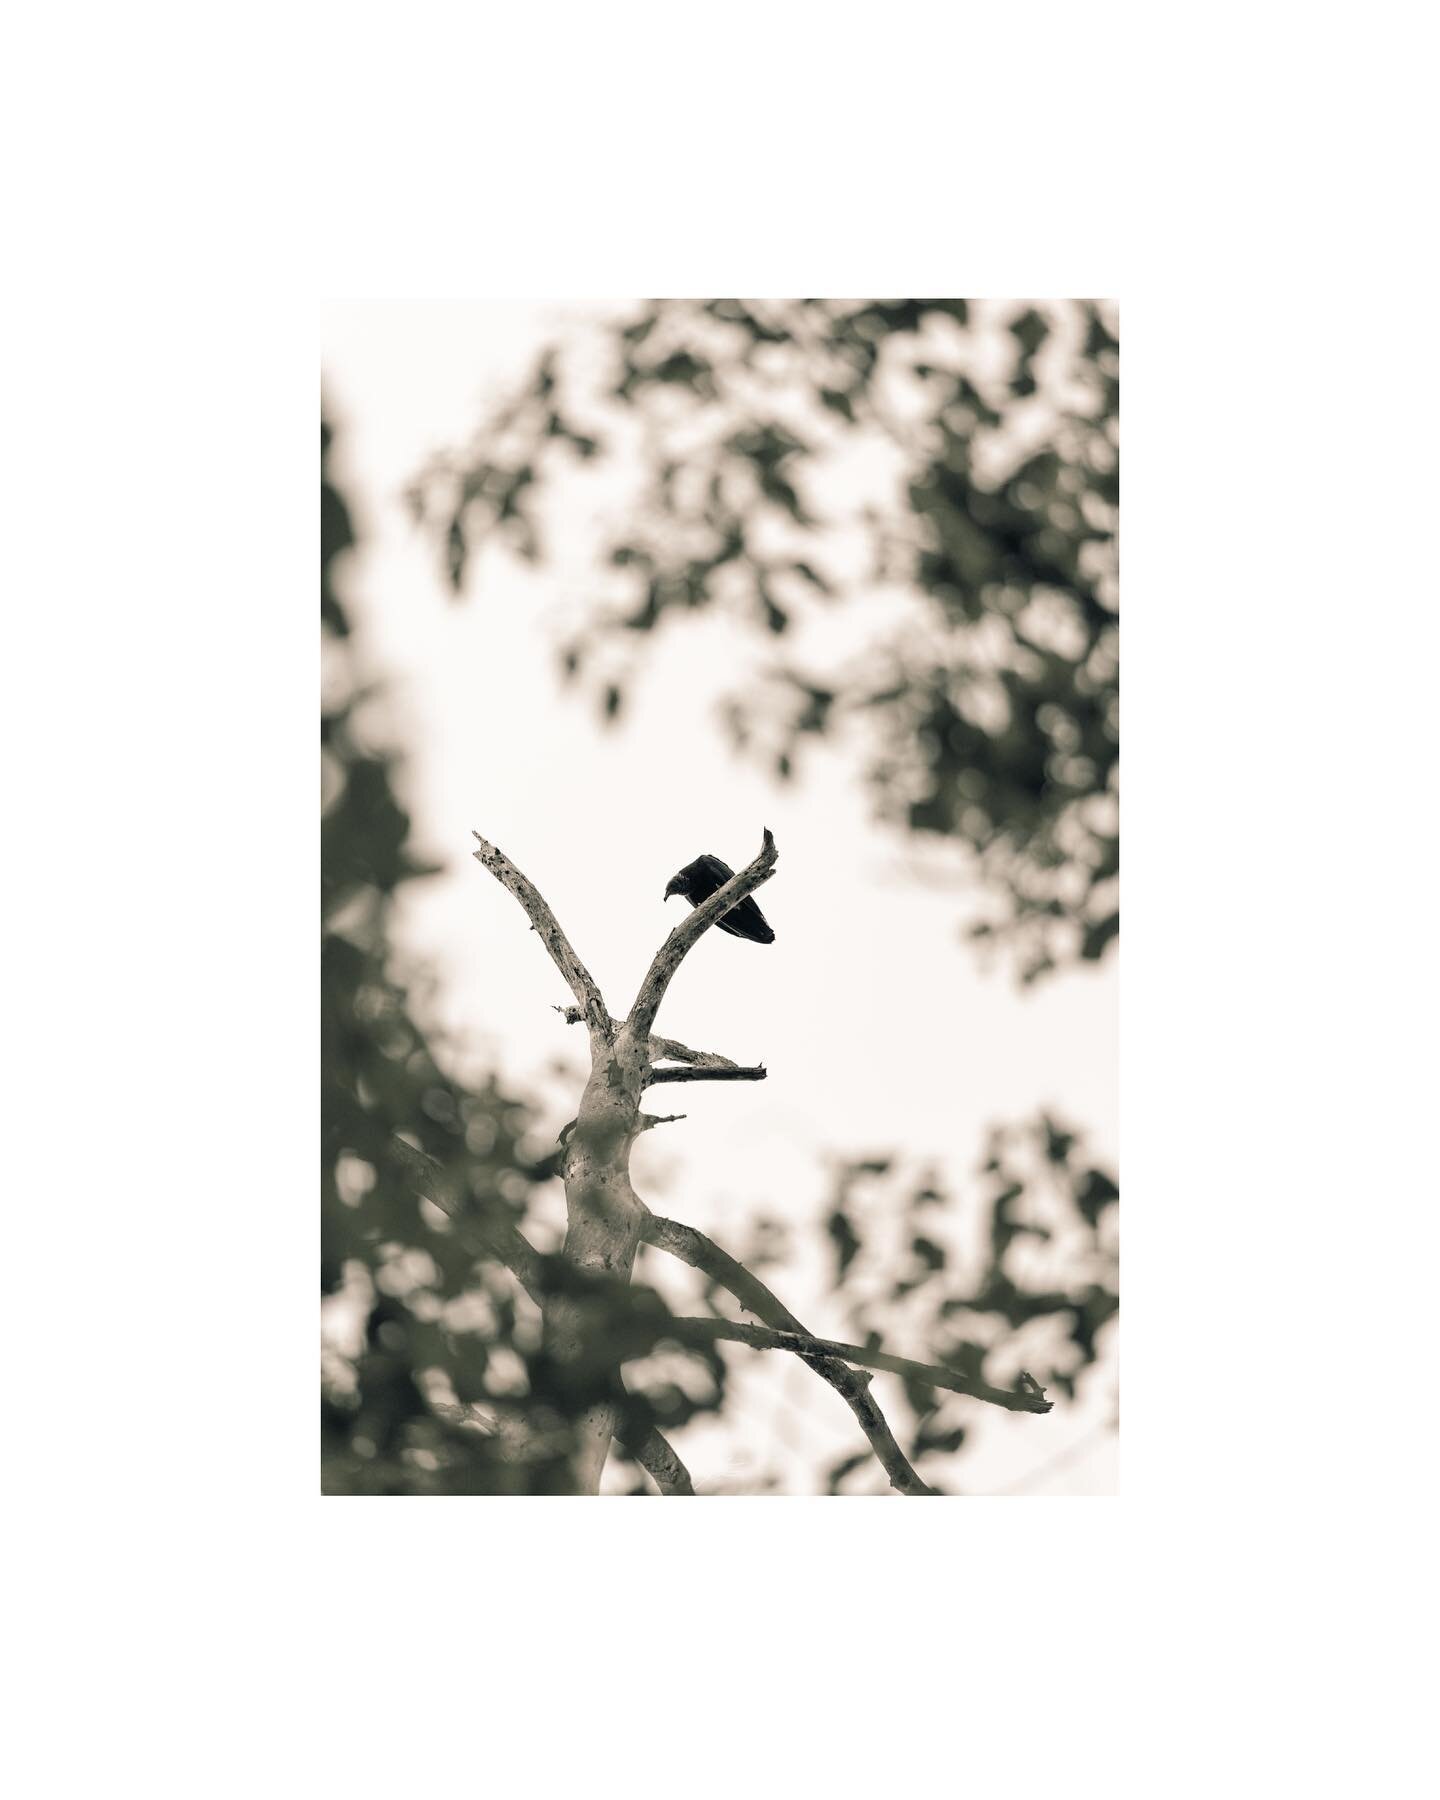 Some more photos taken on a barrier island
.
.
.
#photography #canon #eosr #nature #hiking #coastal #georgia #moss #vulture #animals #trees #south #fineart